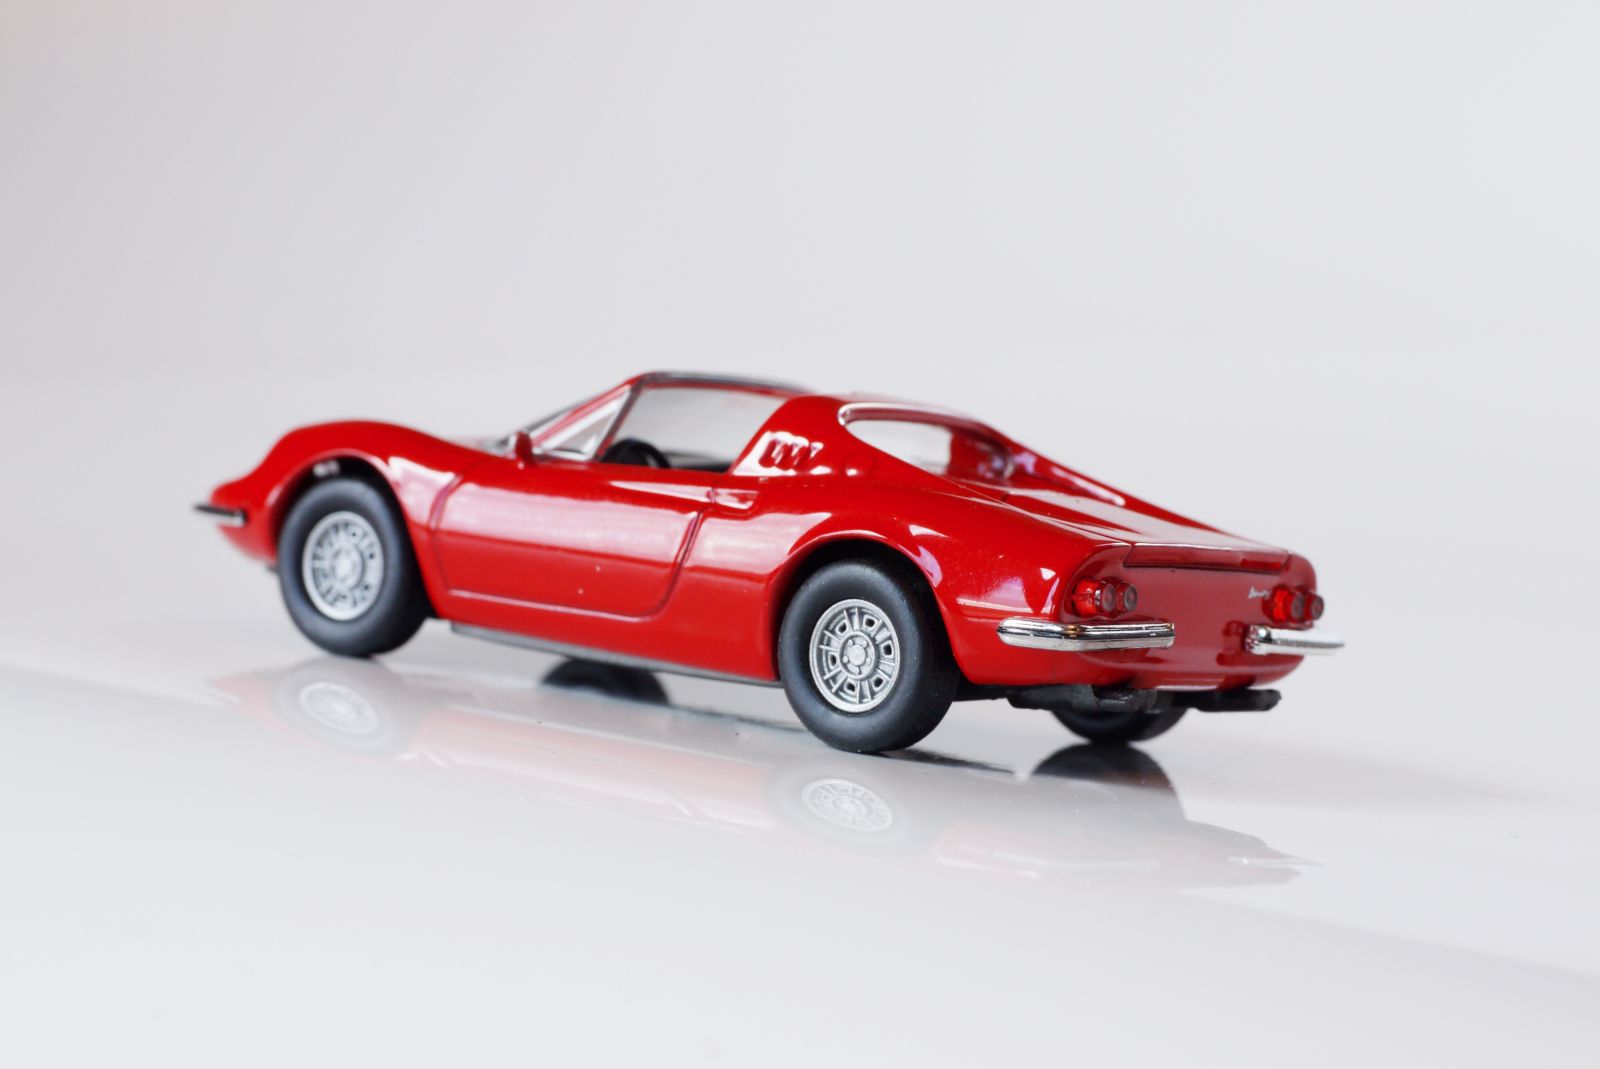 Illustration for article titled Kyosho Ferrari 4 1/64 #9 - Project Prancing Horse #10 - 1972 Dino 246 GTS